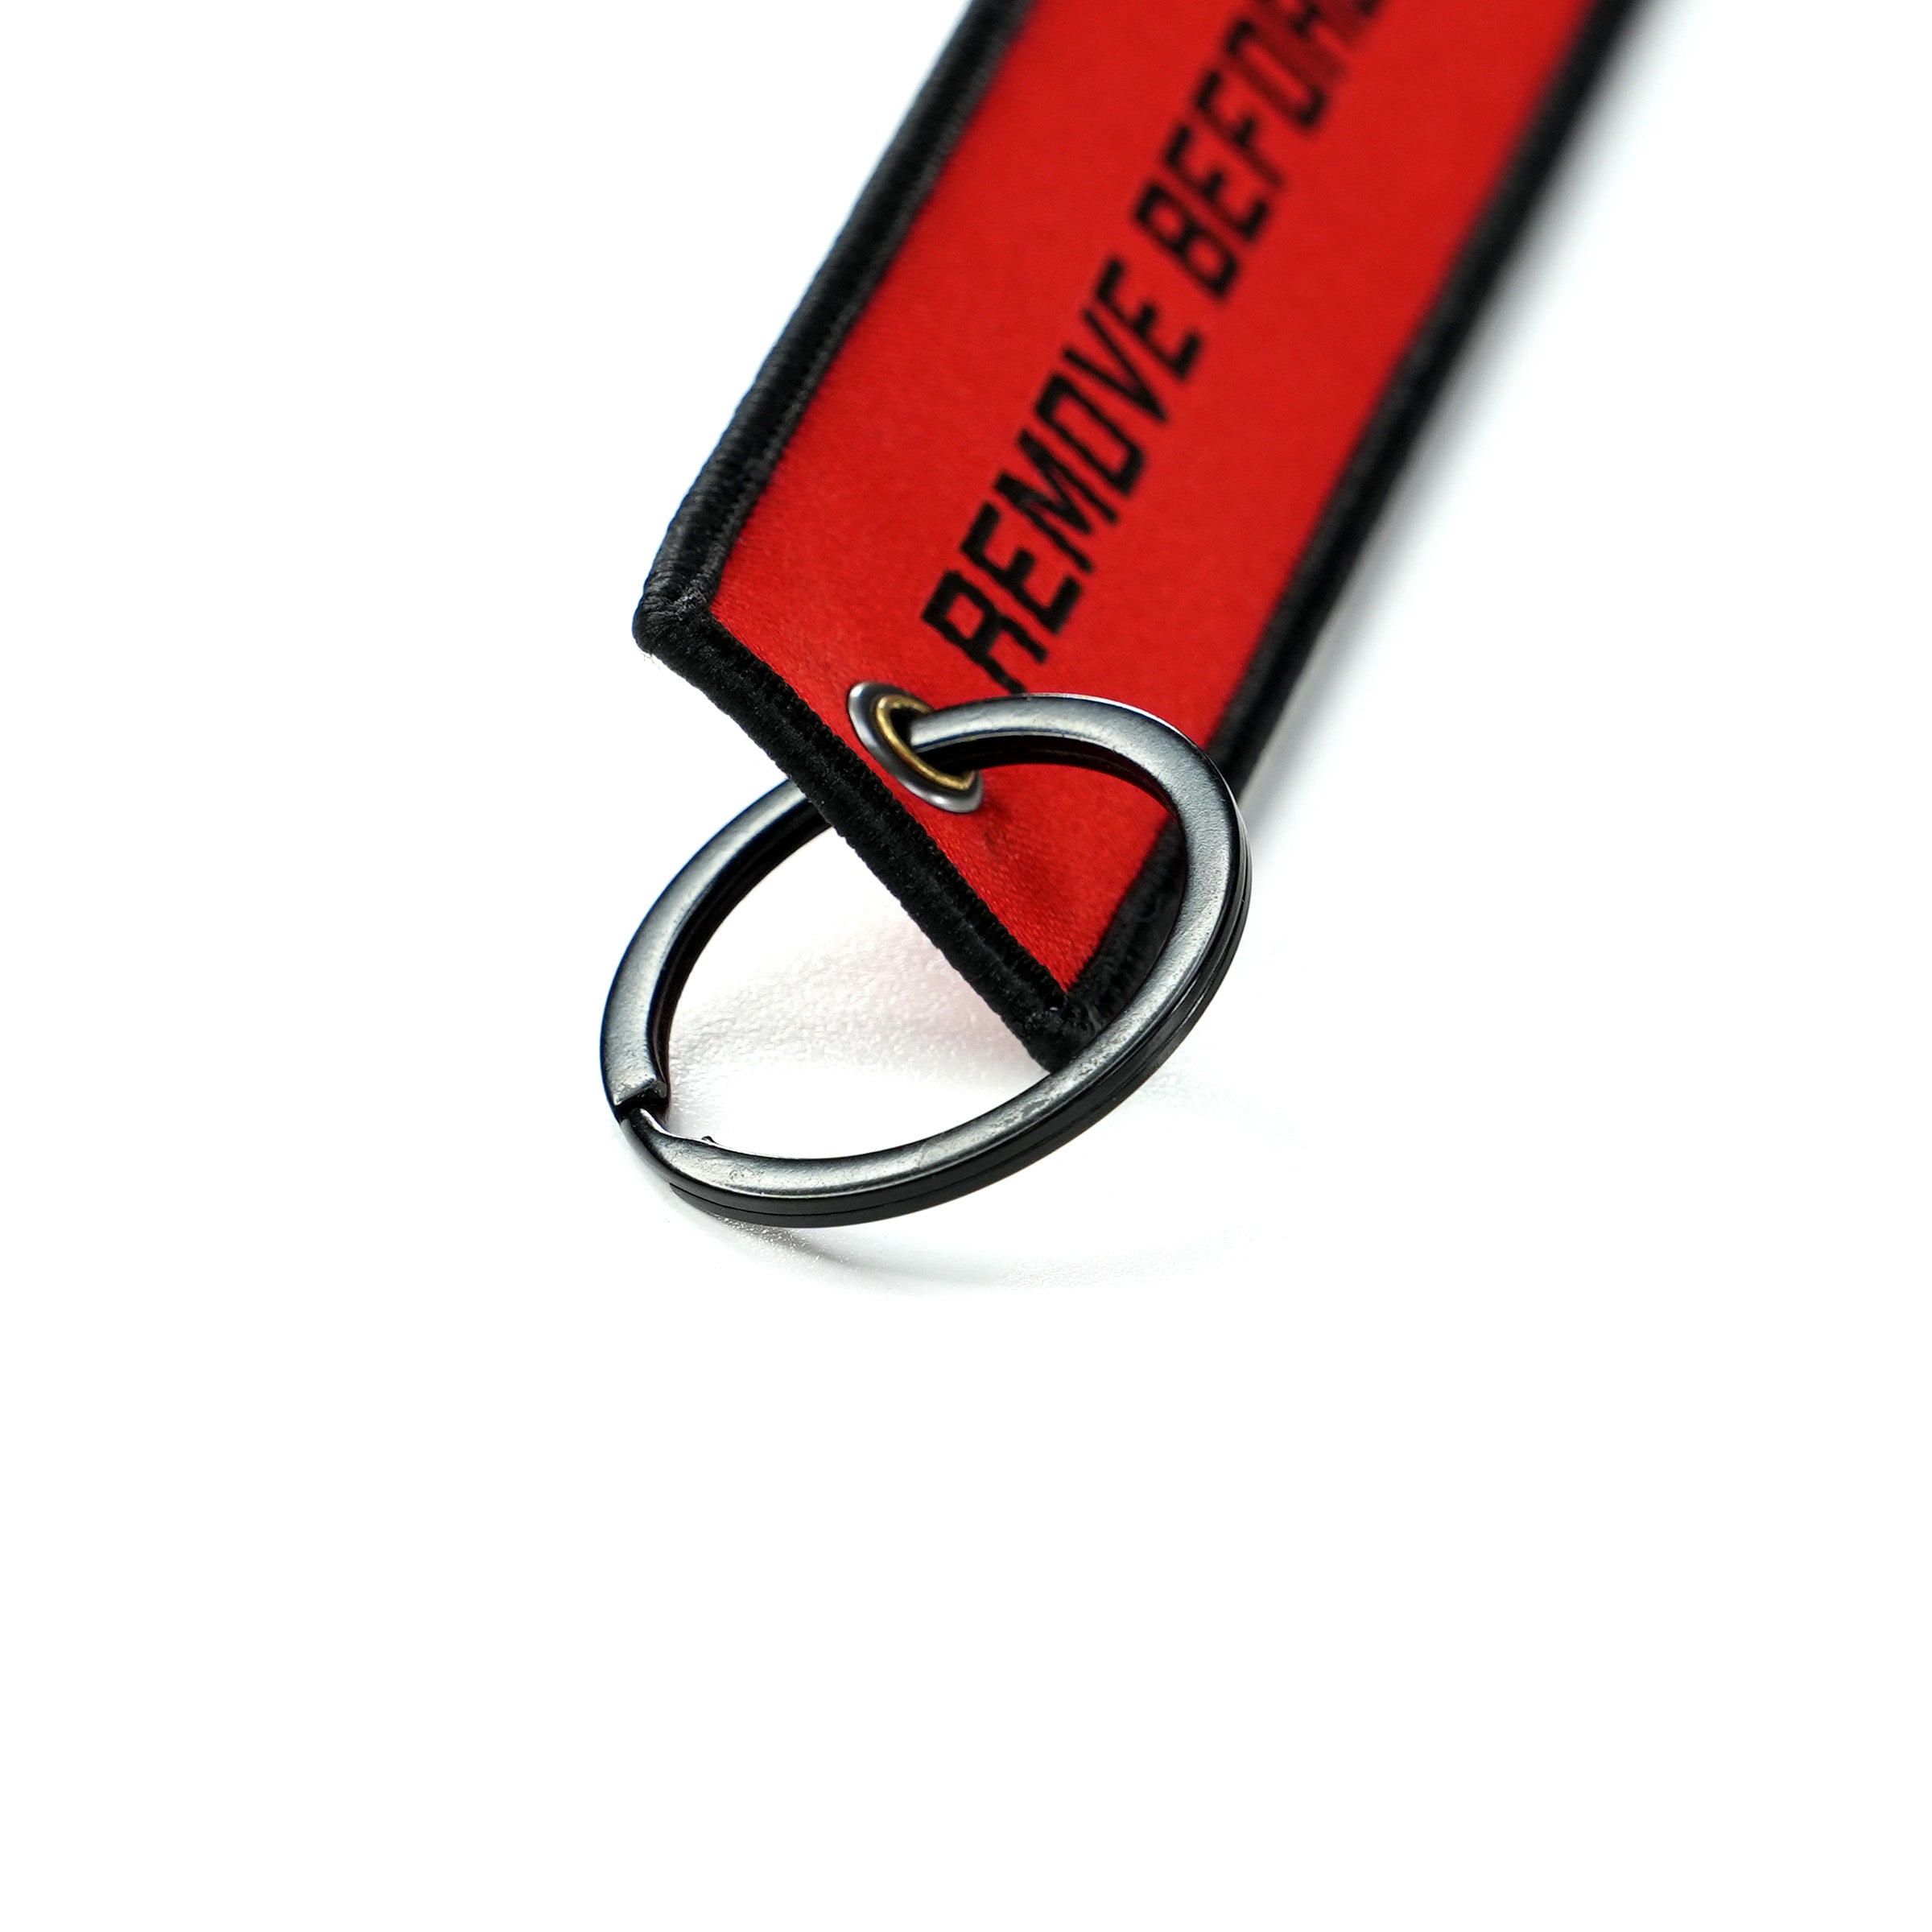 Litt Industries red keychain braap funny durable strong the best keychain on the market